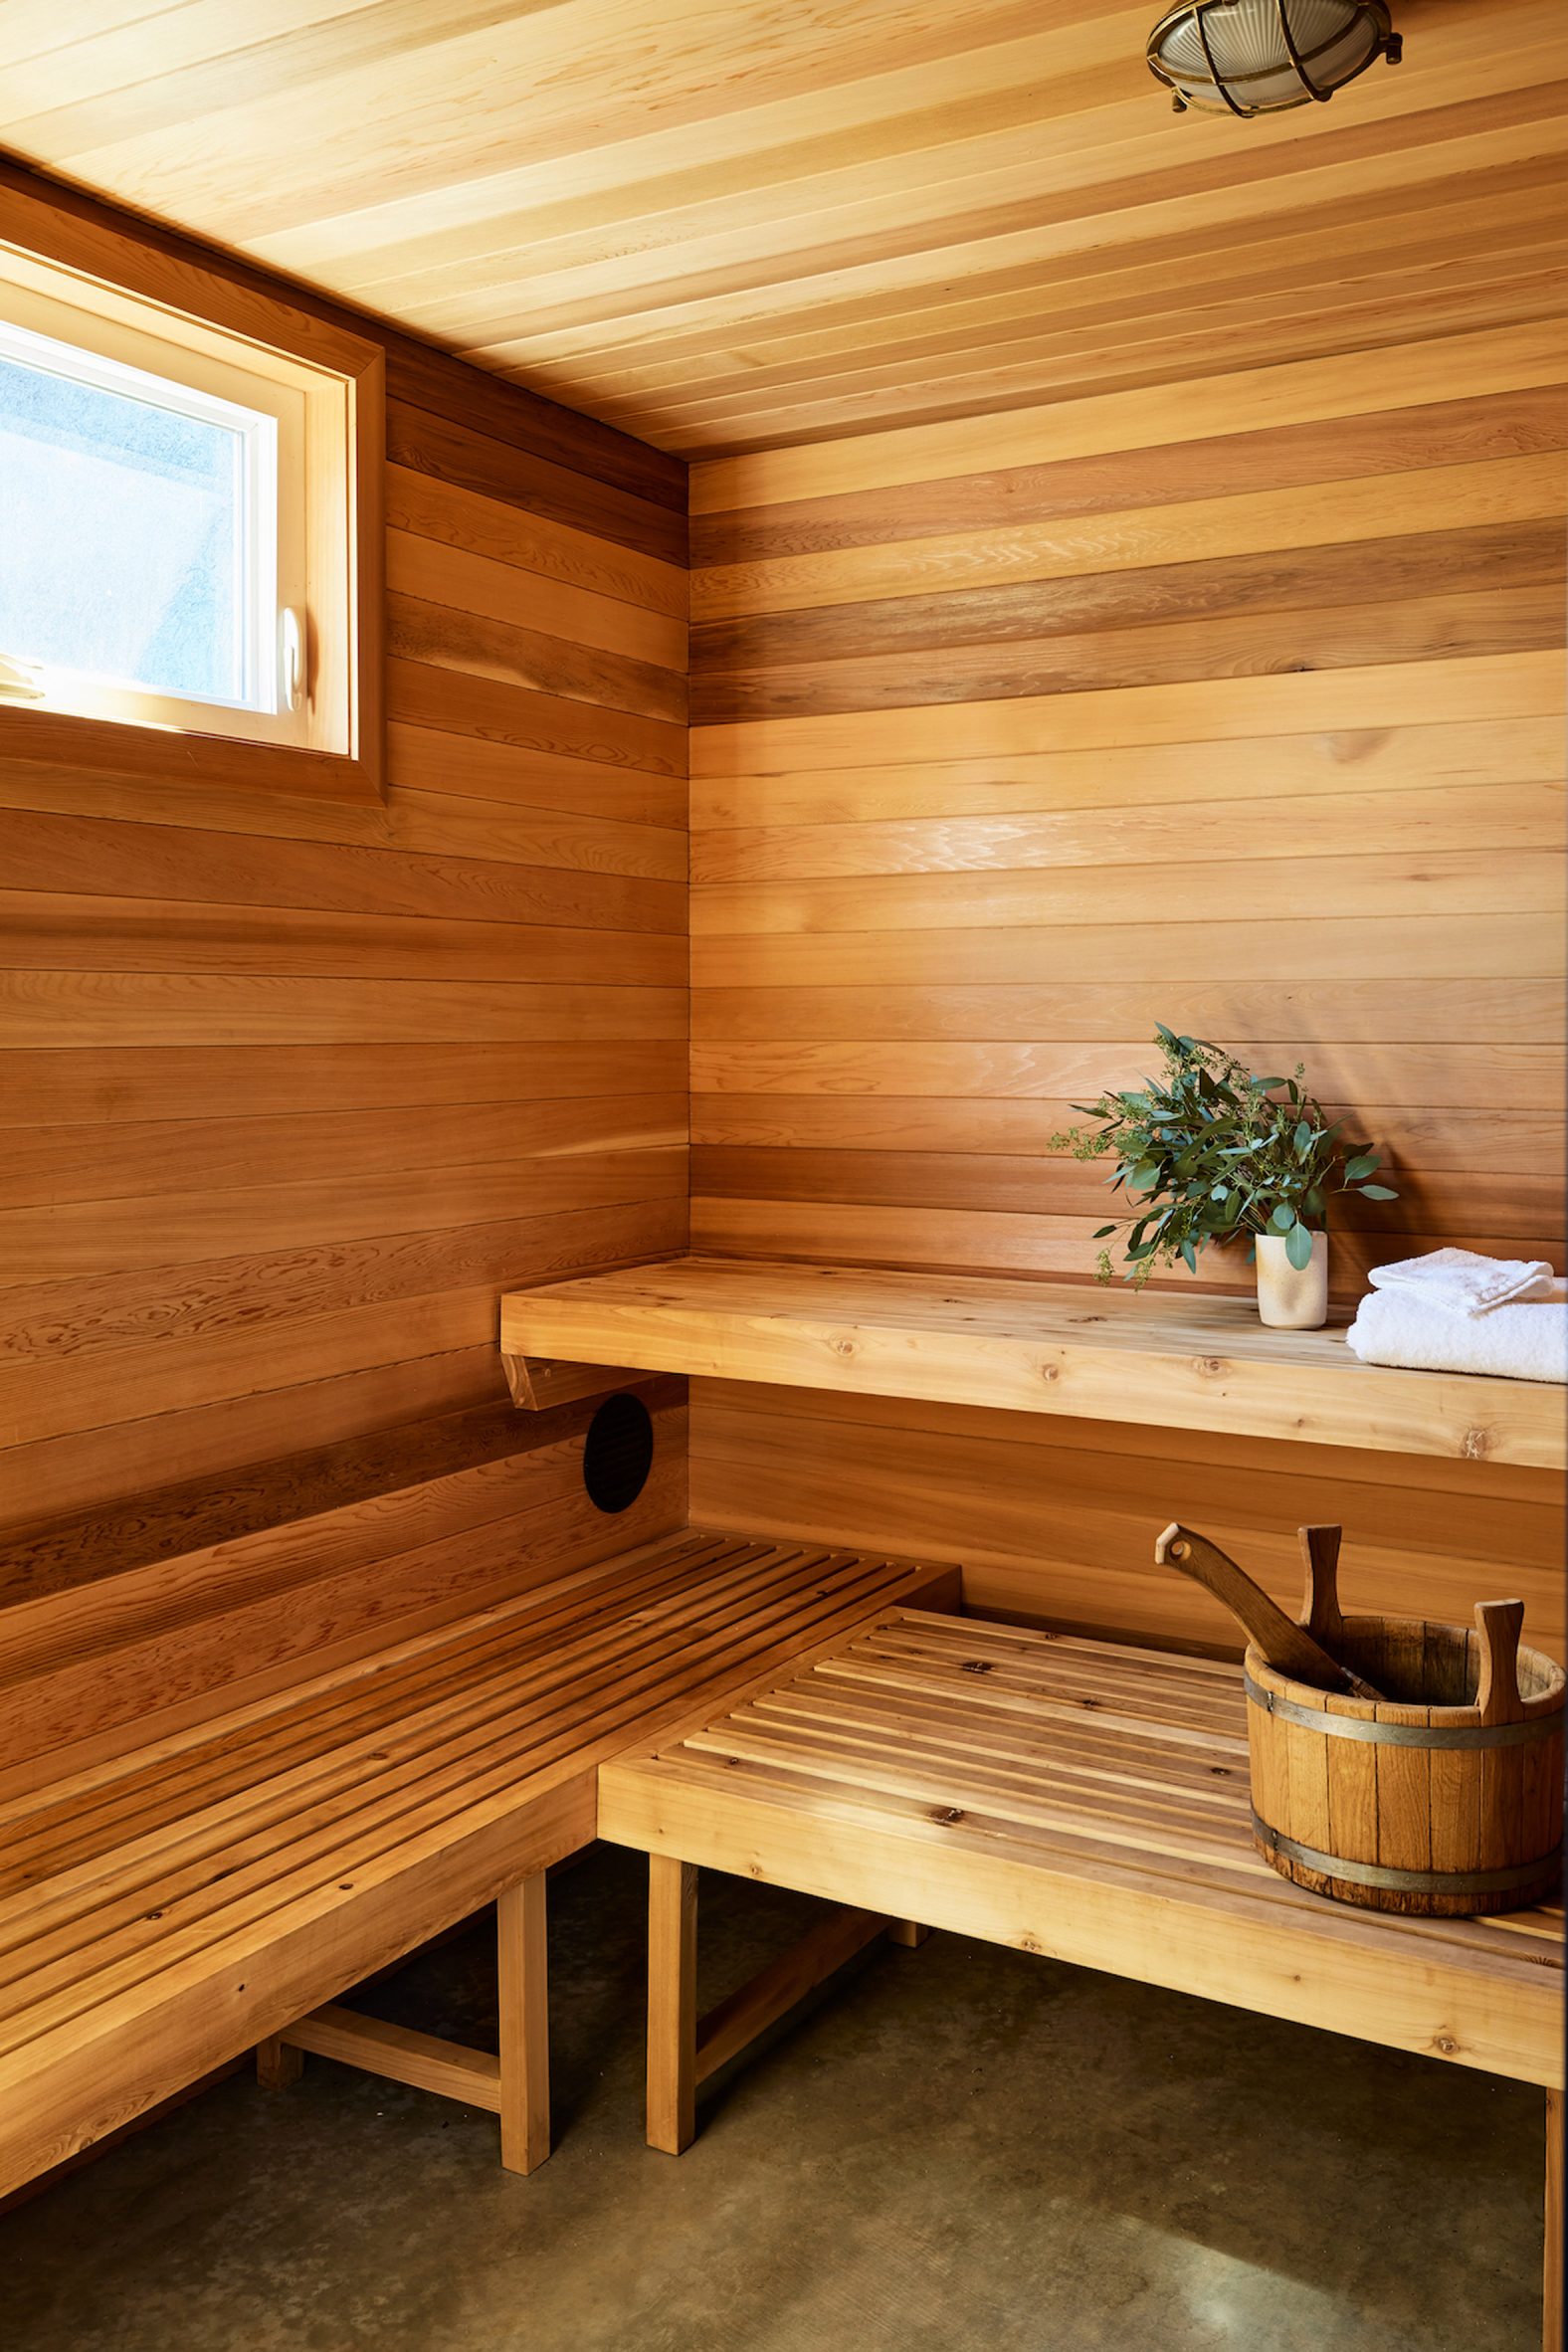 Wood-lined sauna with benches and a water bucket